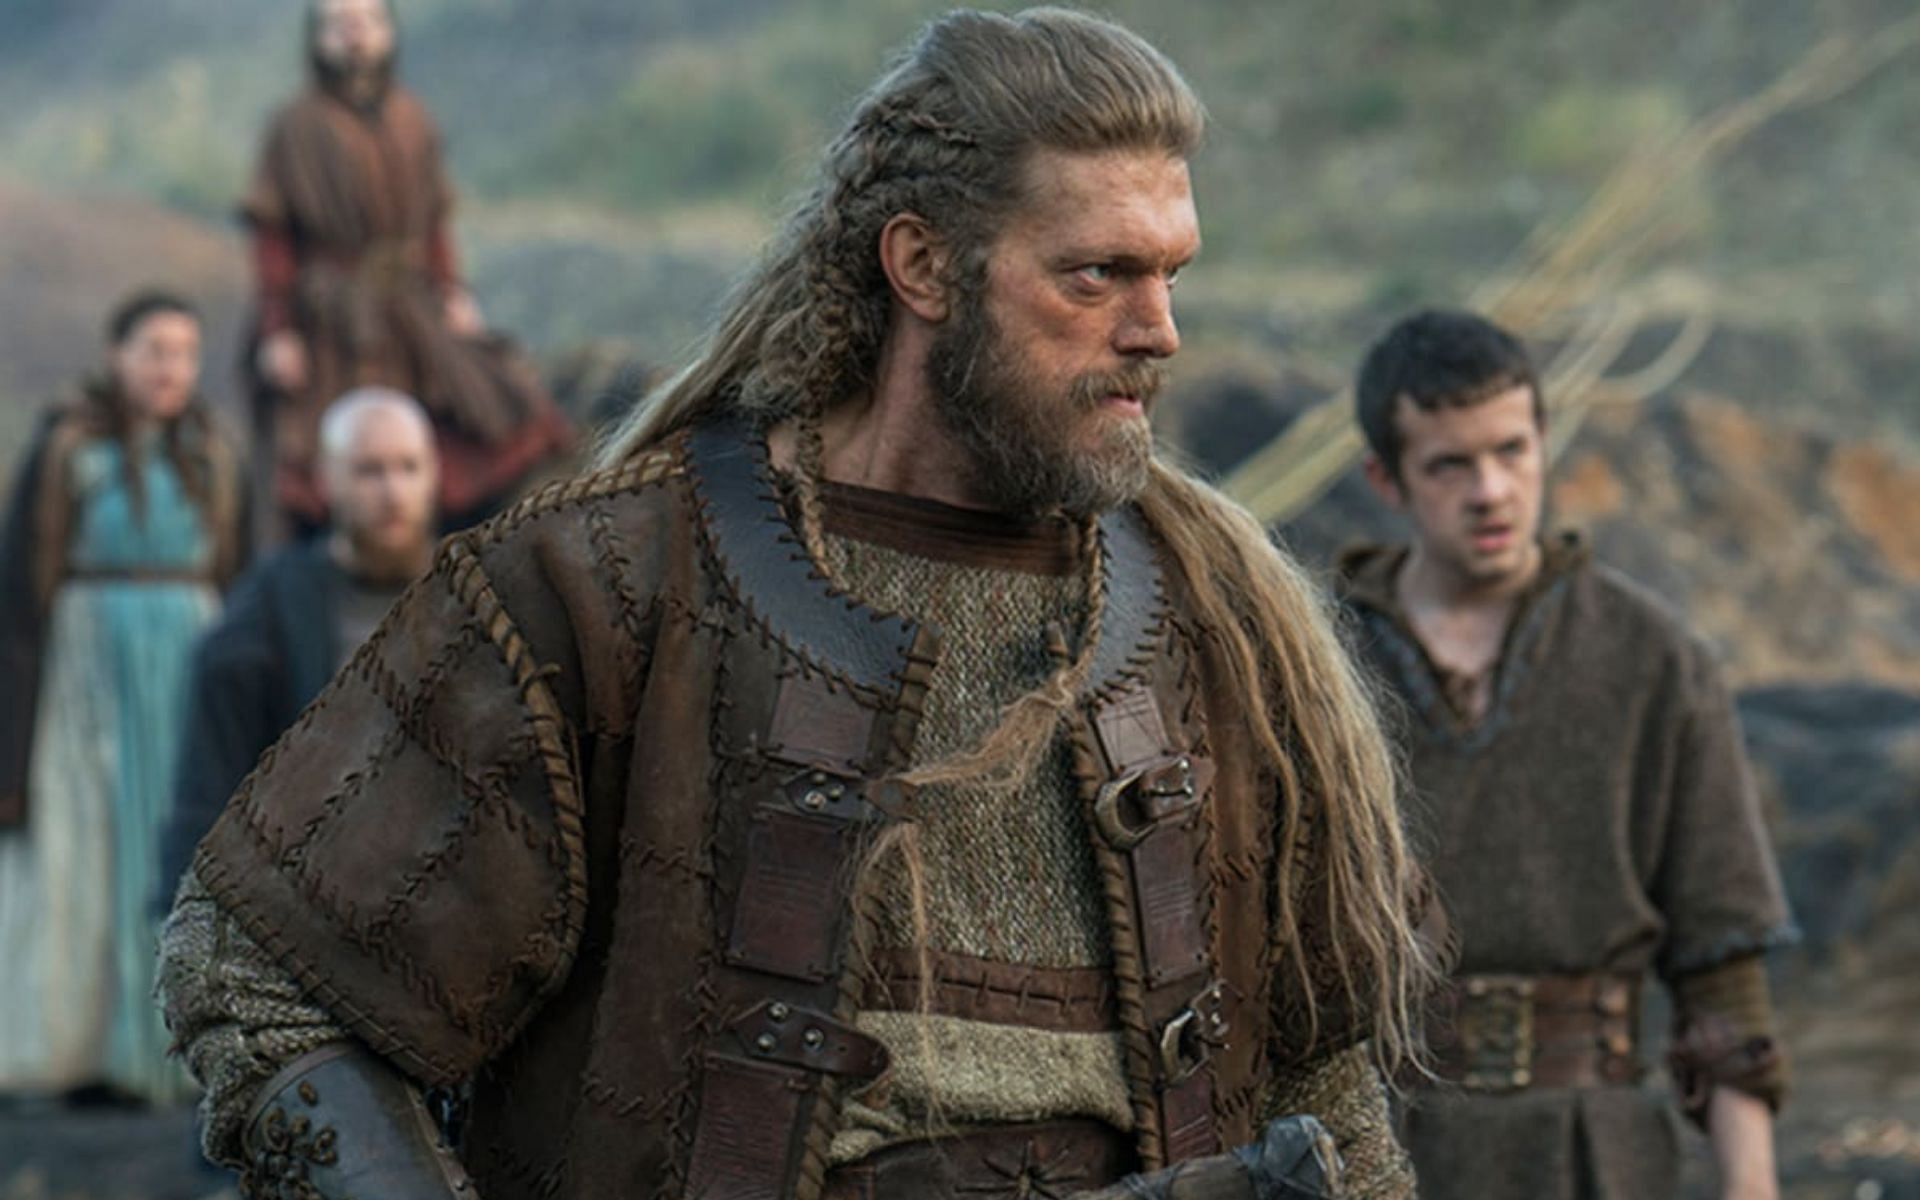 WWE Superstar Edge played a pivotal role in Vikings!